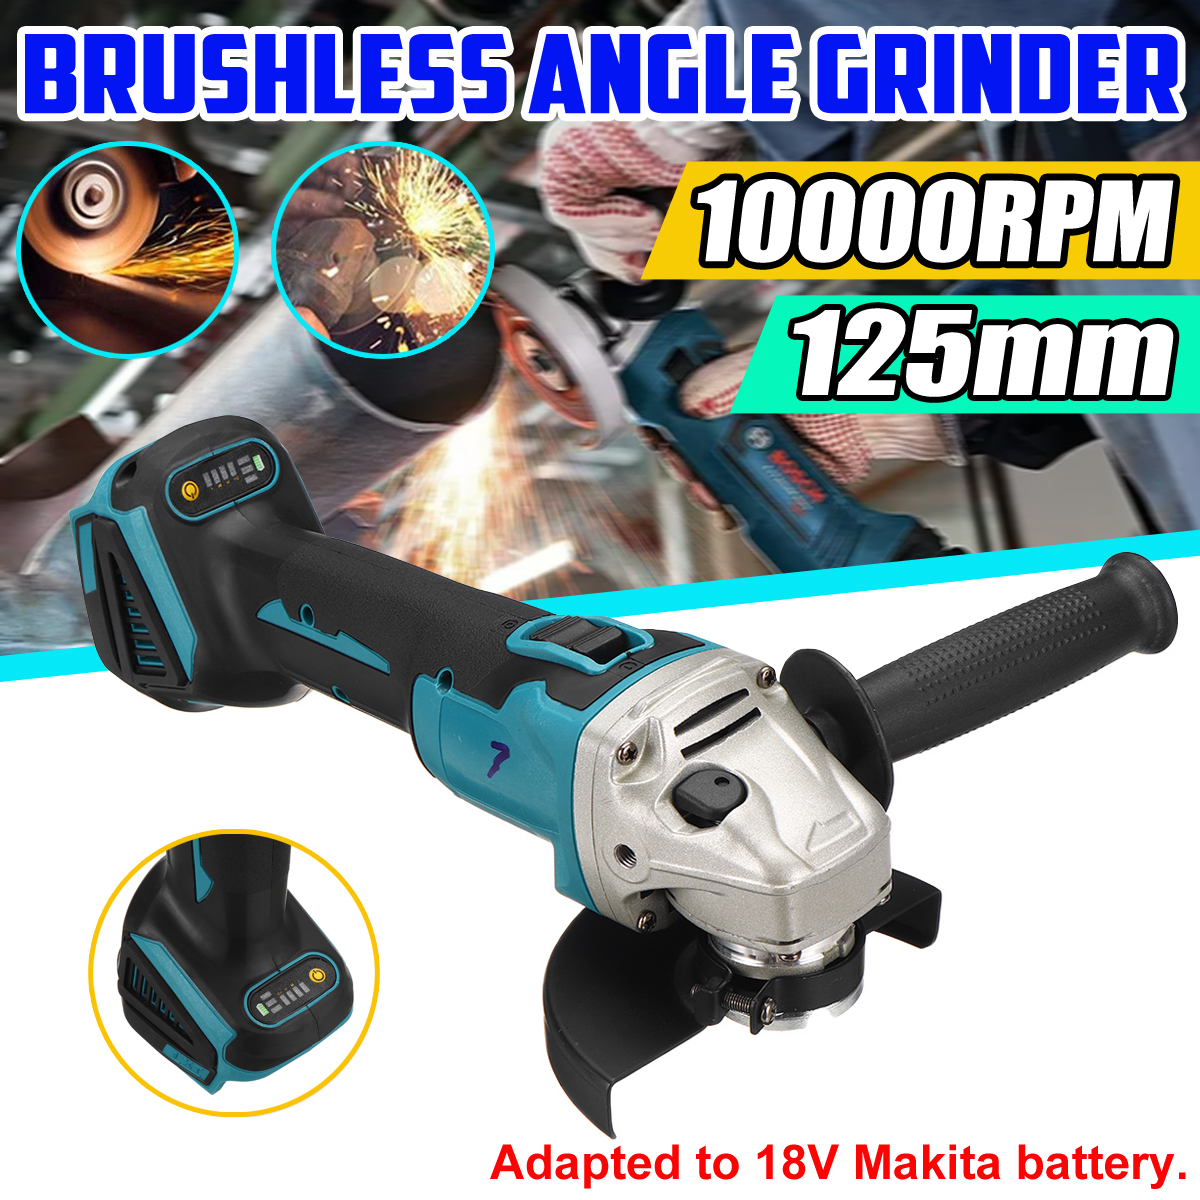 Drillpro-125mm-4-Speed-Regulated-Angle-Grinder-Rechargable-Li-ion-Battery-Brushless-Electric-Grinder-1699793-1